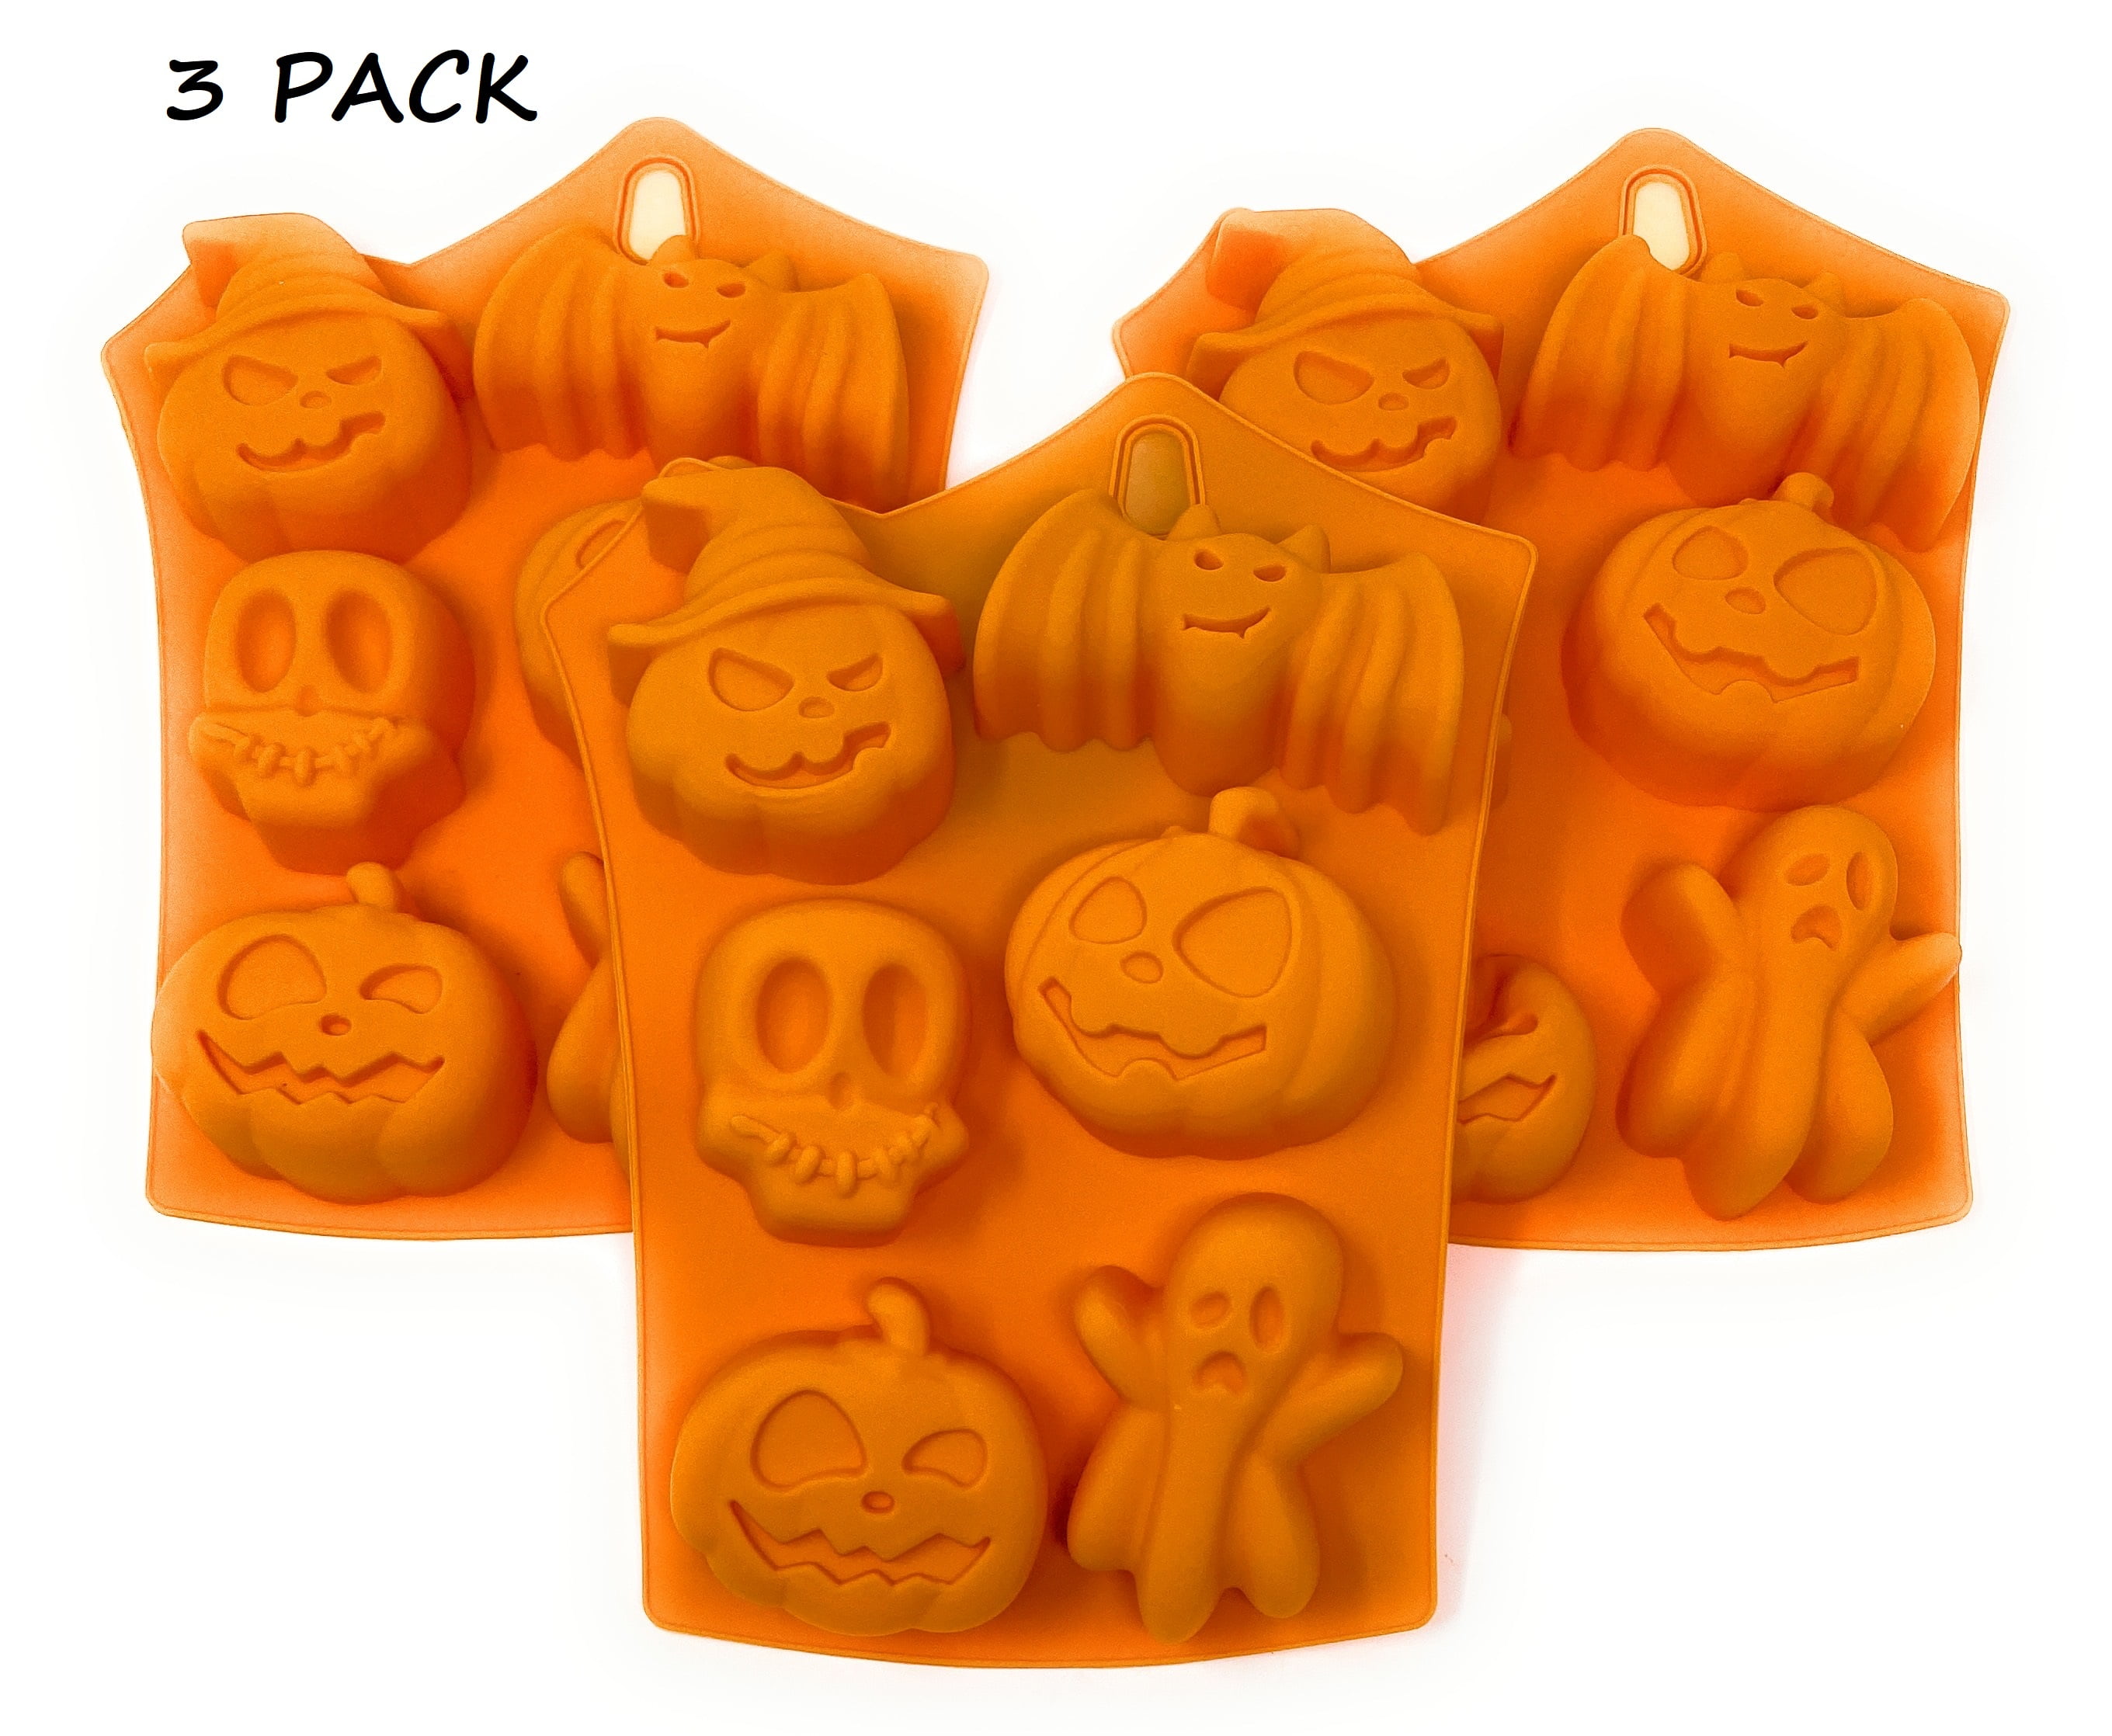 DUNCHATY Halloween Silicone Baking Molds - 3PCS, Nonstick Pumpkin Molds,  Perfect for Making Ice Cube, Chocolate, Cupcakes